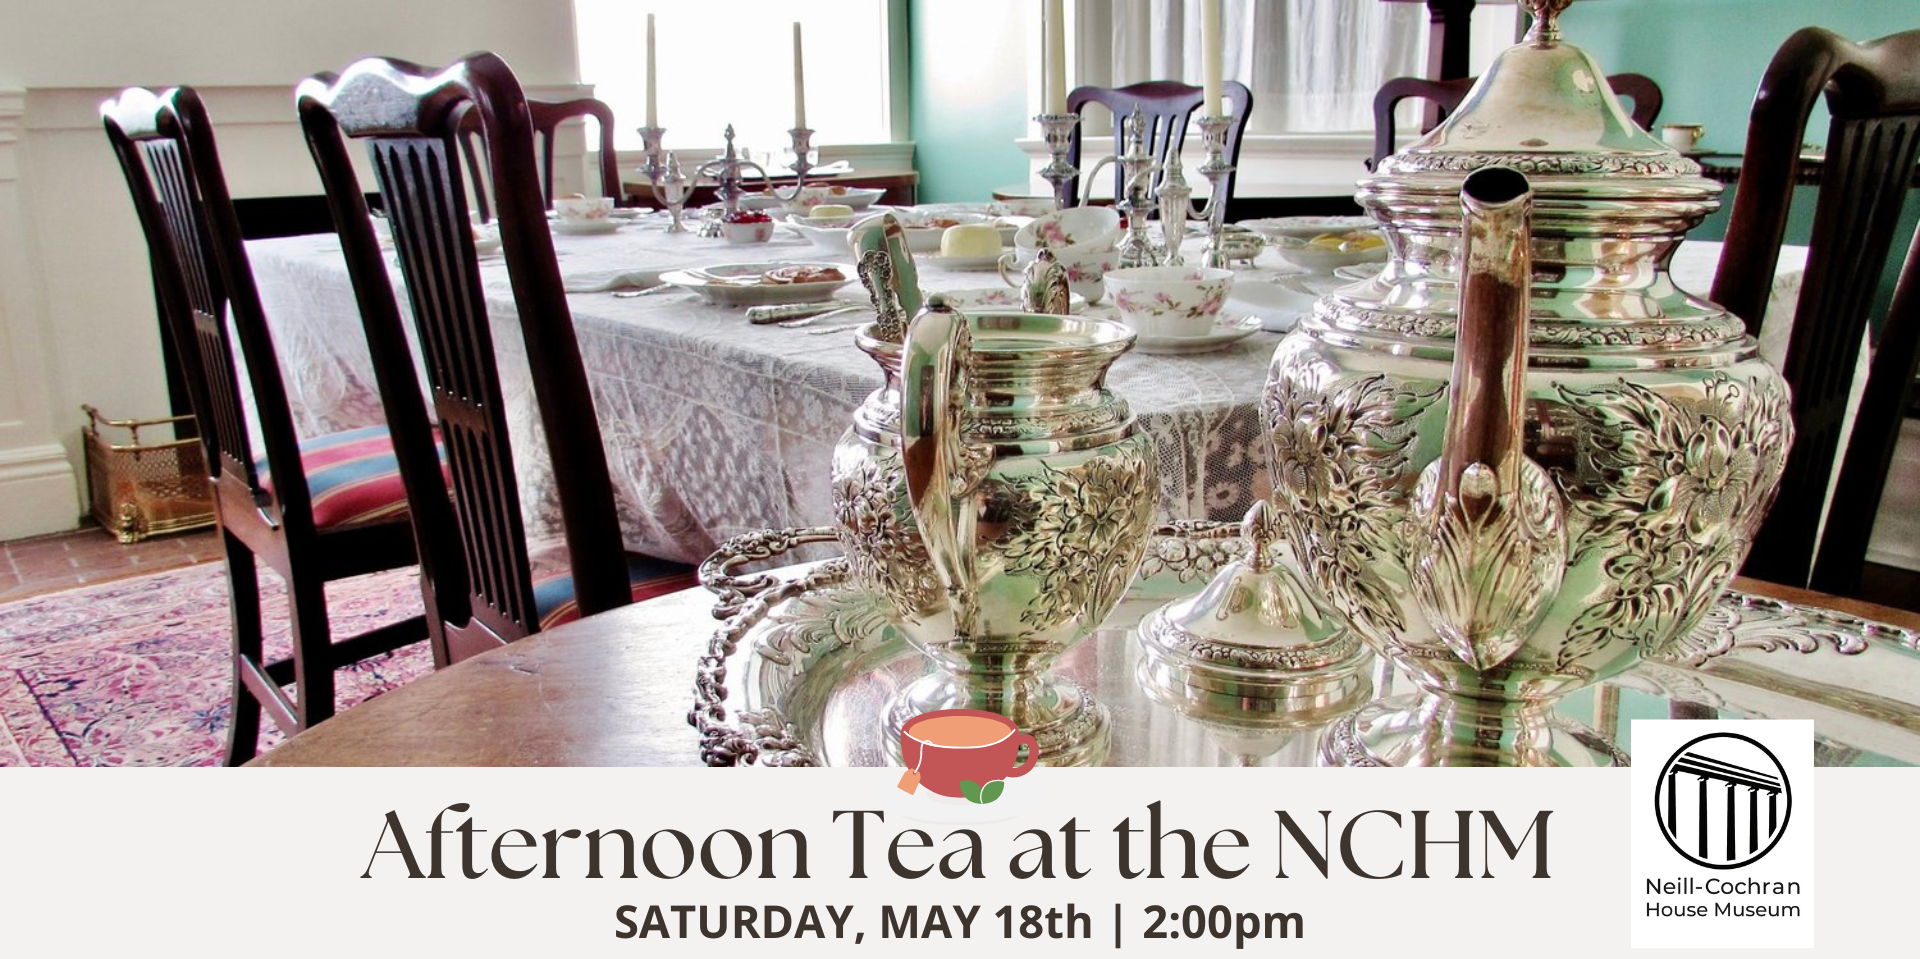 Afternoon Tea at the Neill-Cochran House Museum promotional image